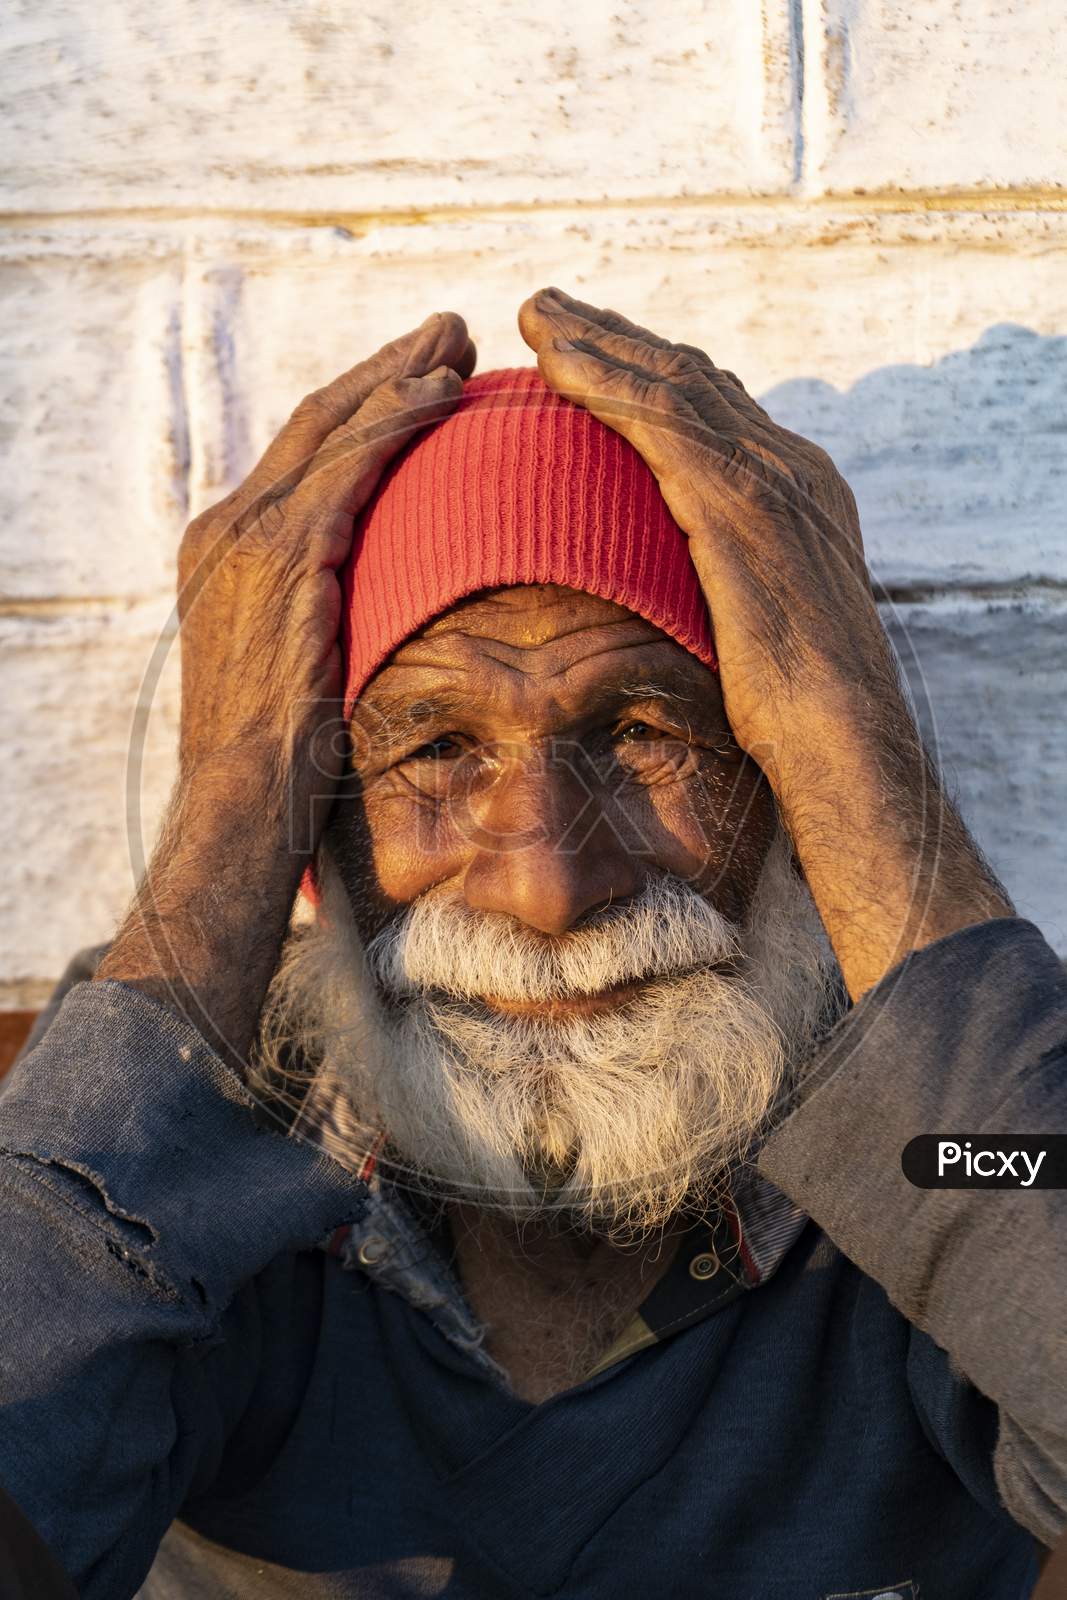 Portrait Of An Old Indian Man, Old Aged Man With Wrinkles On His Face Holding His Face With His Hands And Sitting In The Sunlight.